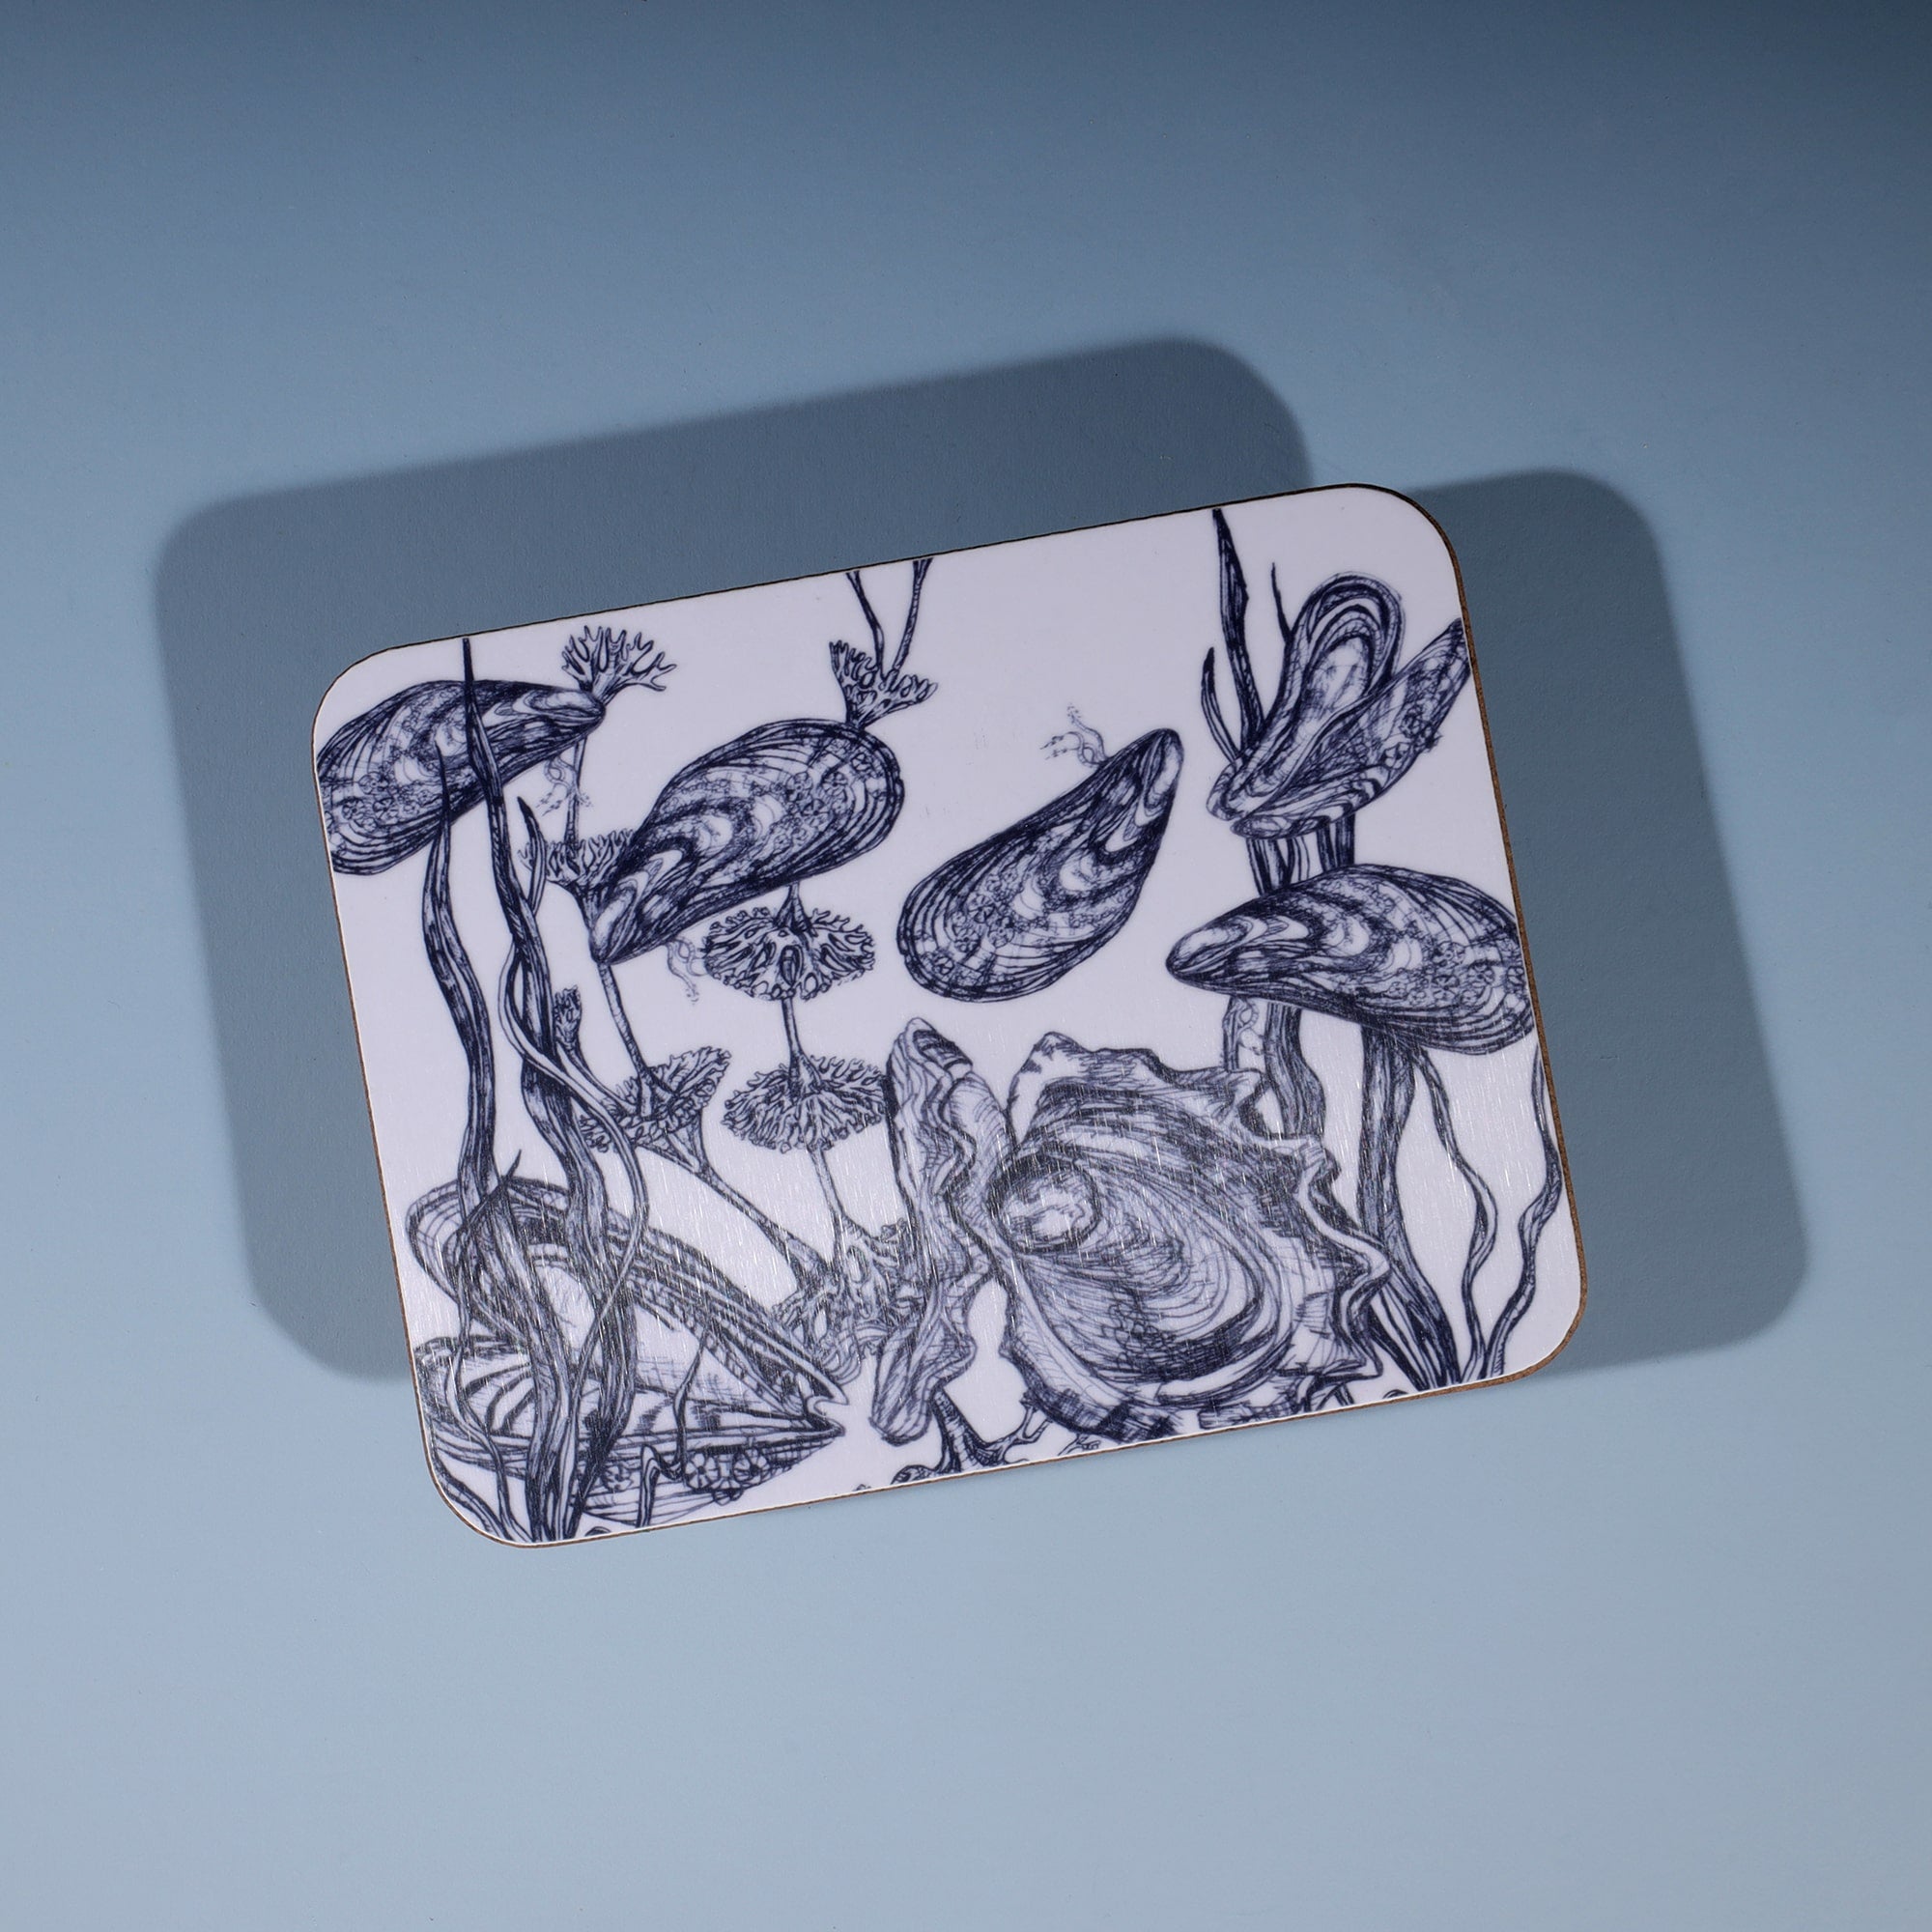 Mussels and Oyster Design in Navy on a white Coaster